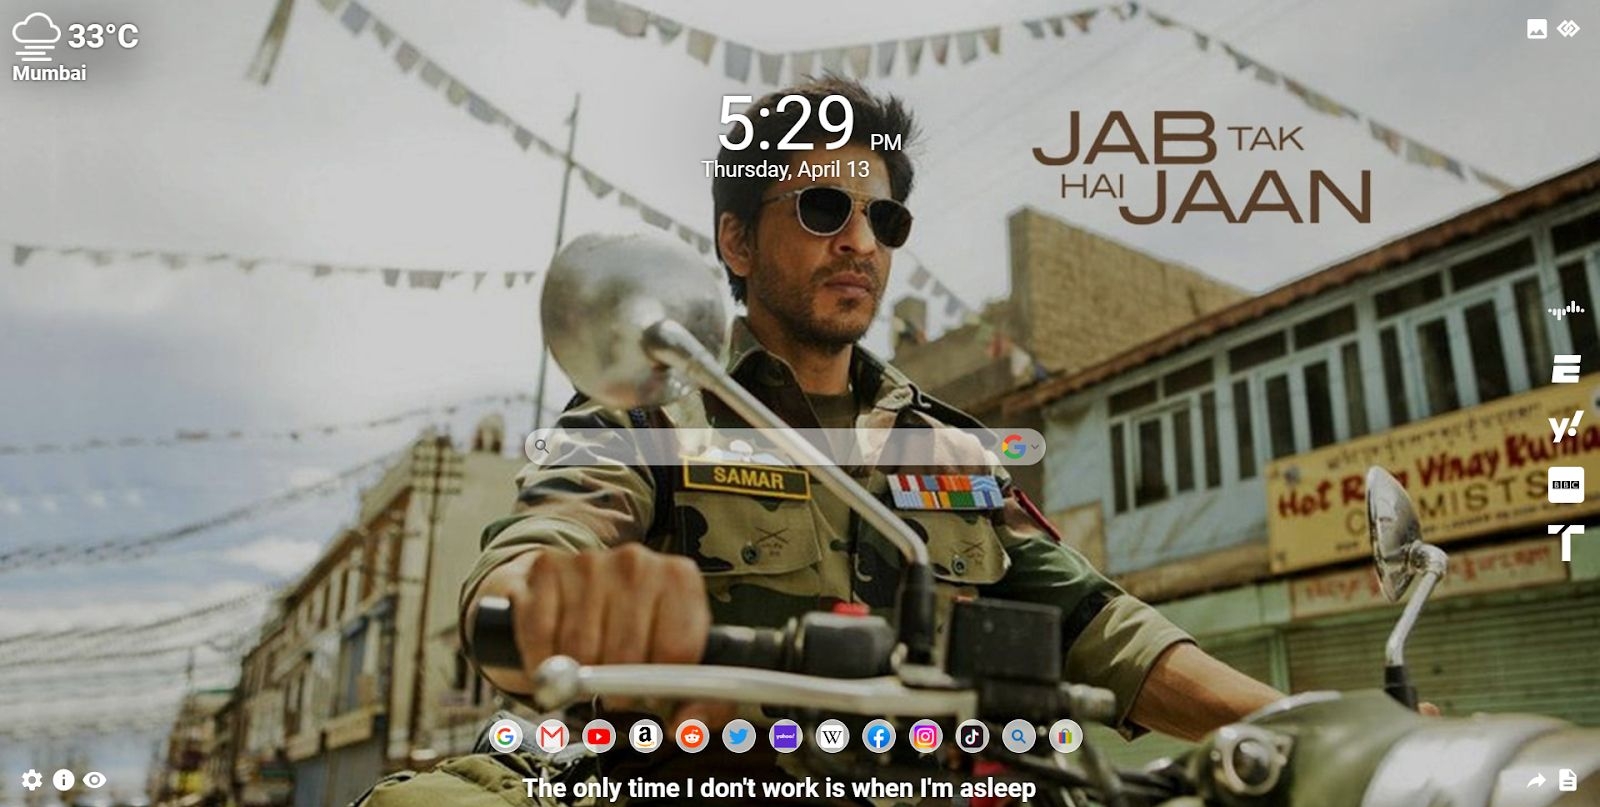 MeaVana Chrome Extension: A Must-Have for Shah Rukh Khan Fans to Enjoy Stunning Wallpapers and More!